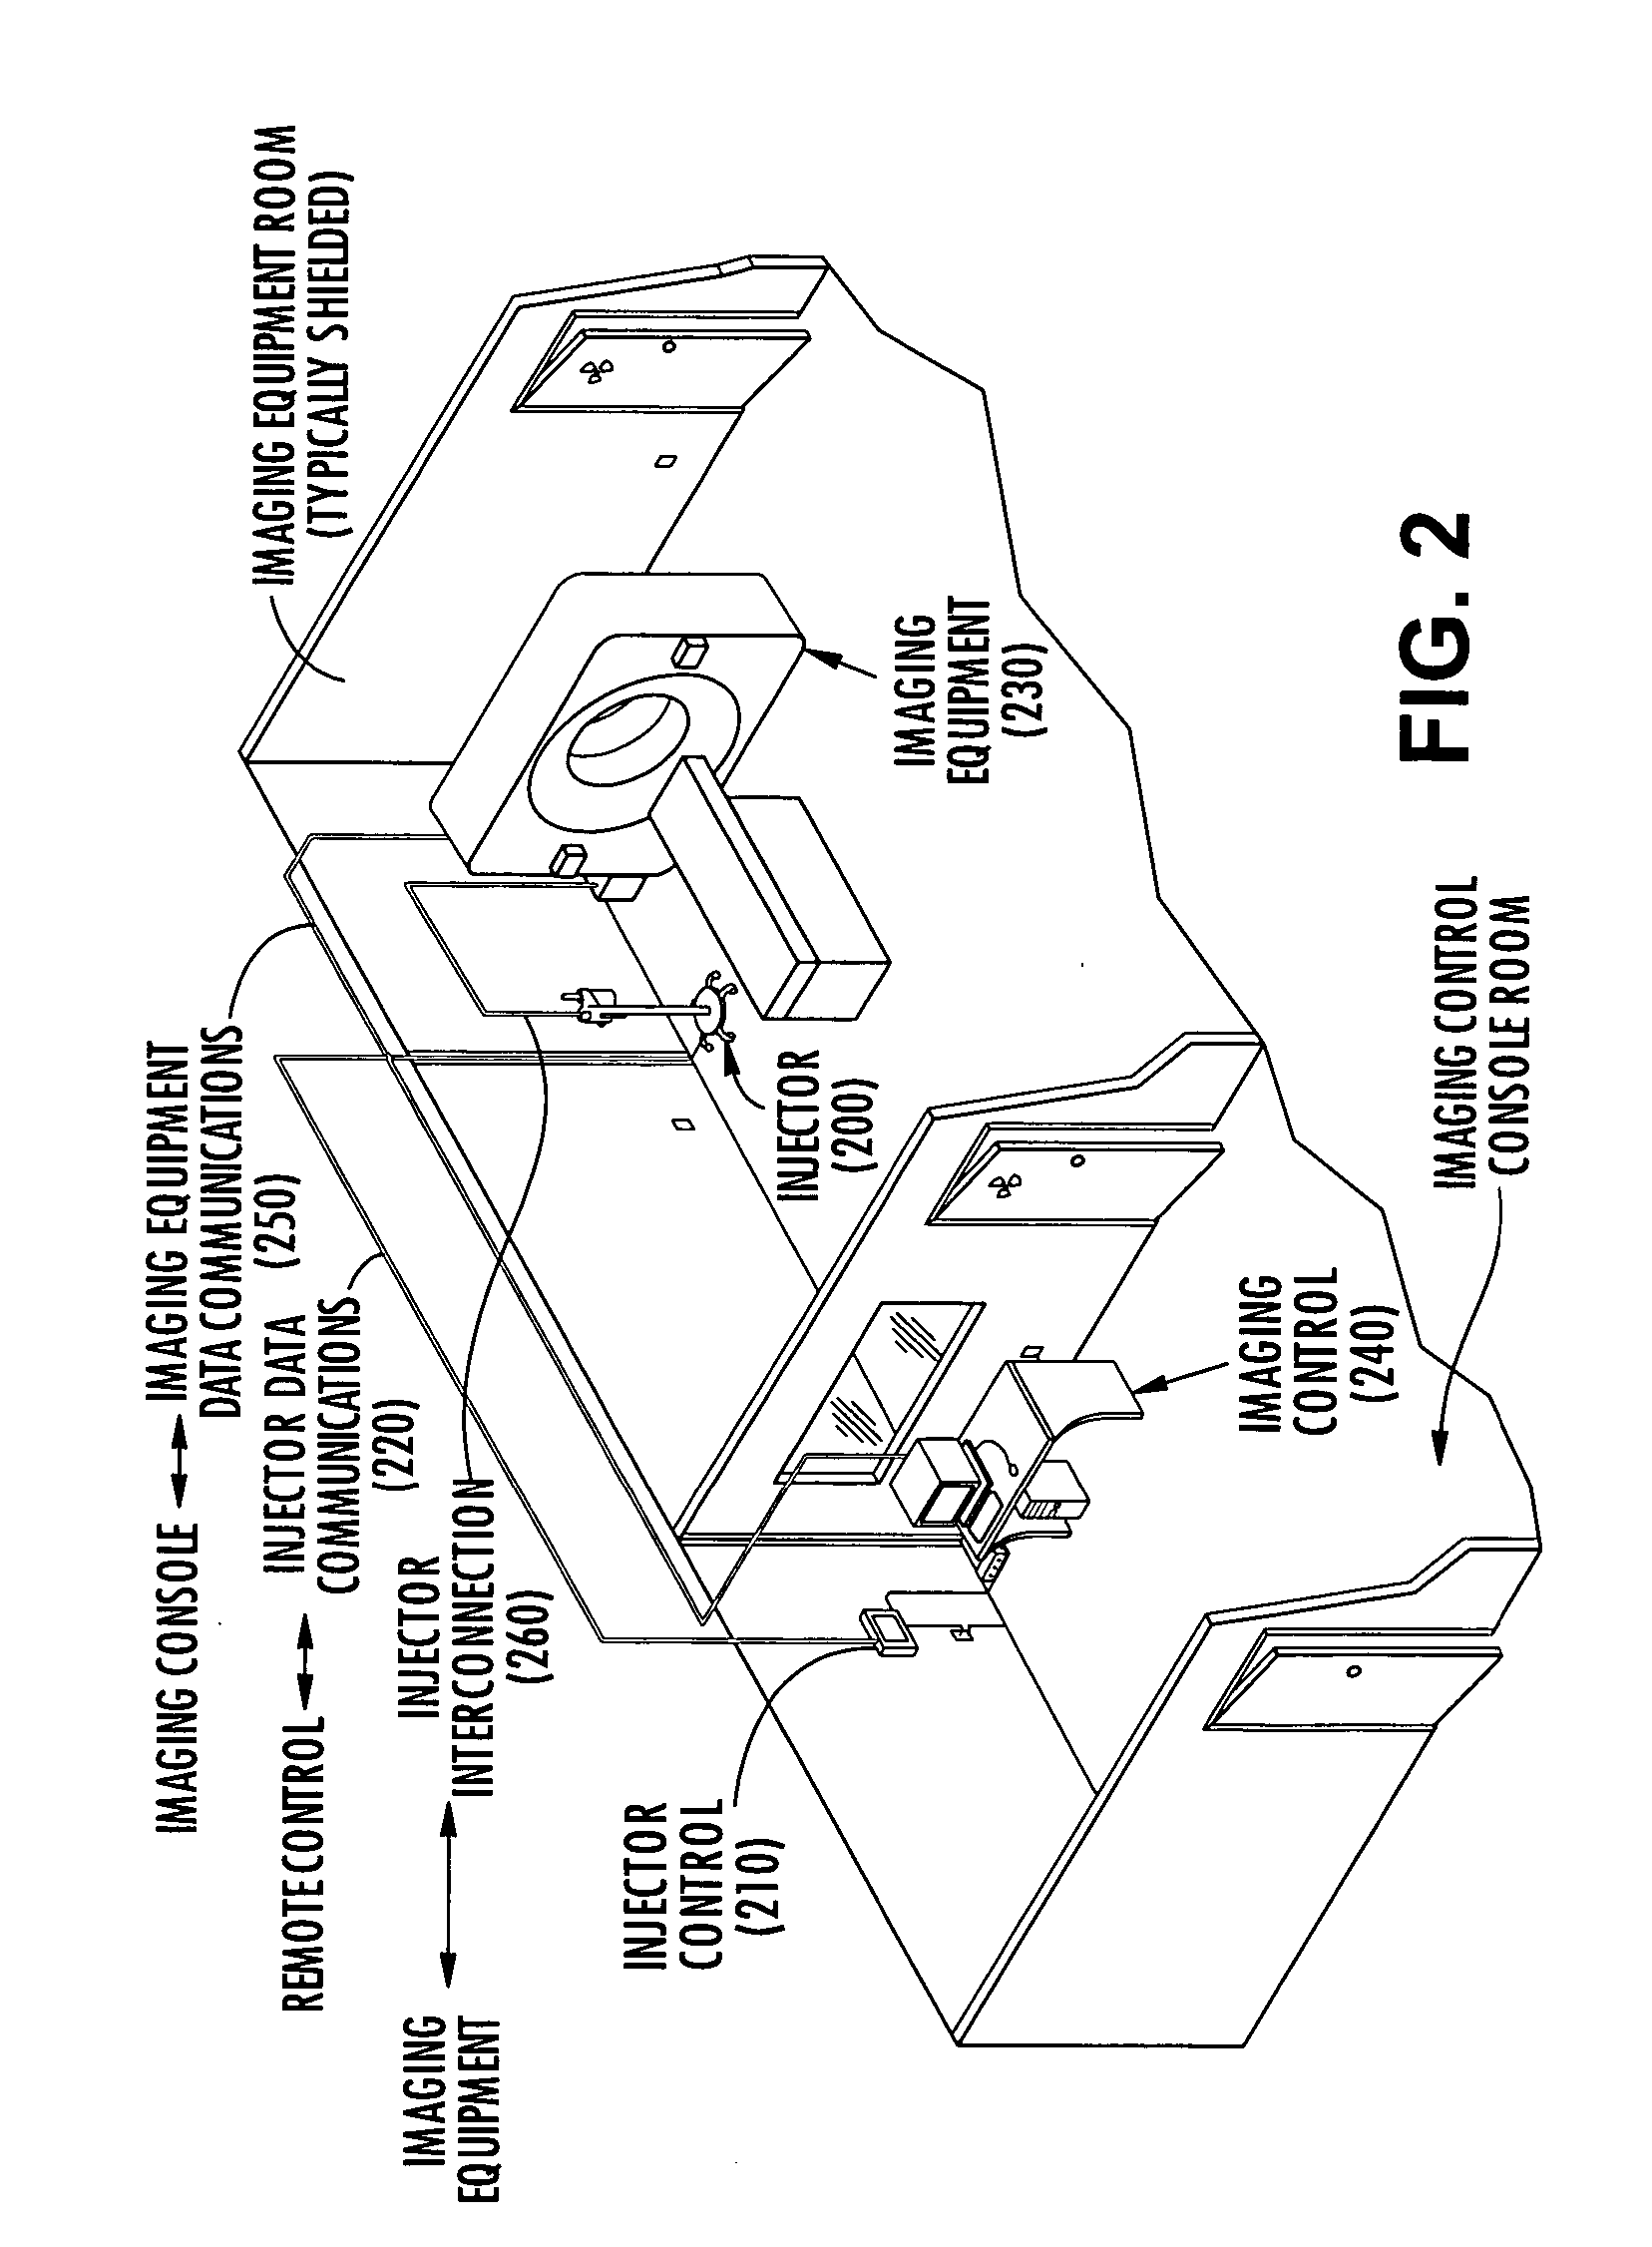 Method system and apparatus for operating a medical injector and diagnostic imaging device